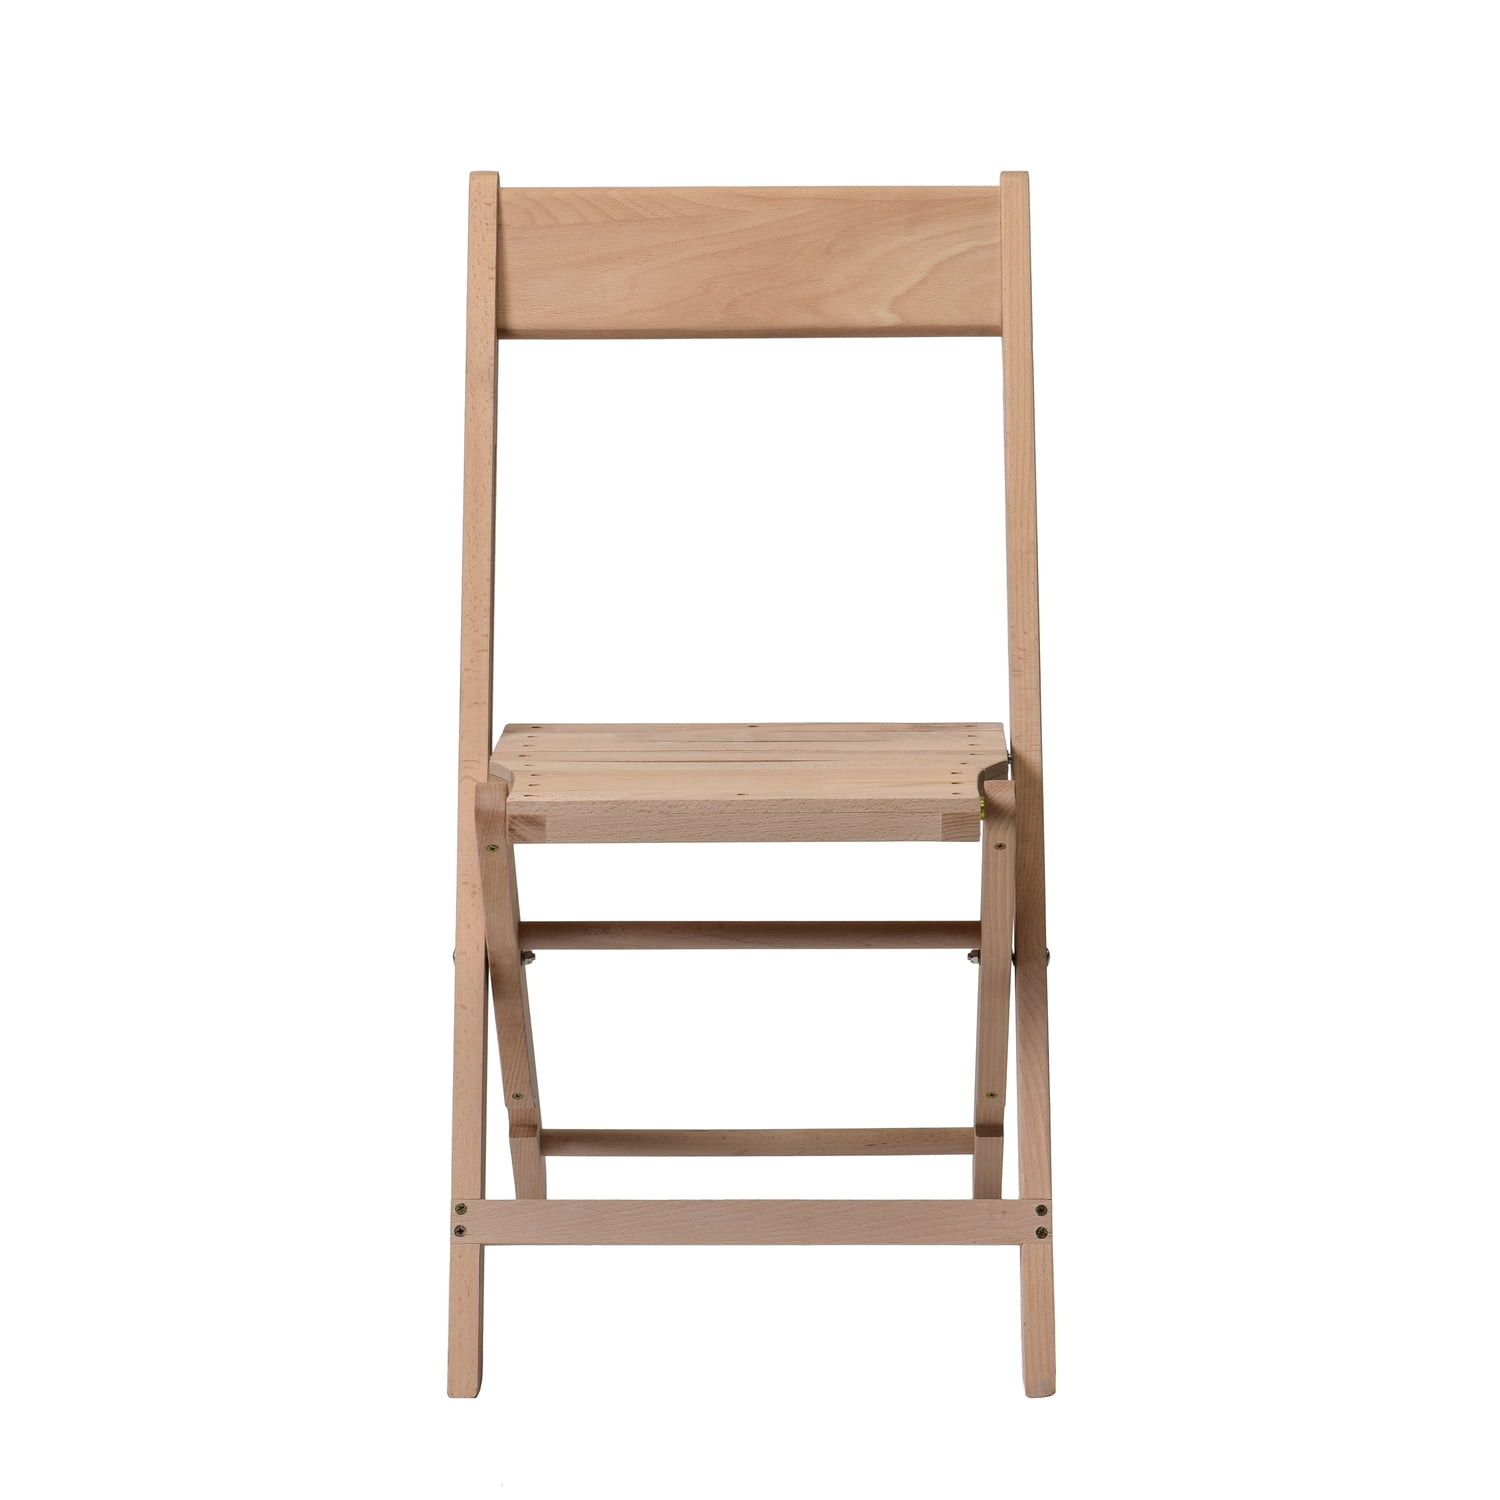 Picture of Commercial Seating Products A-101-NA-4 American Classic Natural Wood Folding Chair - 30.5 in. - Set of 4